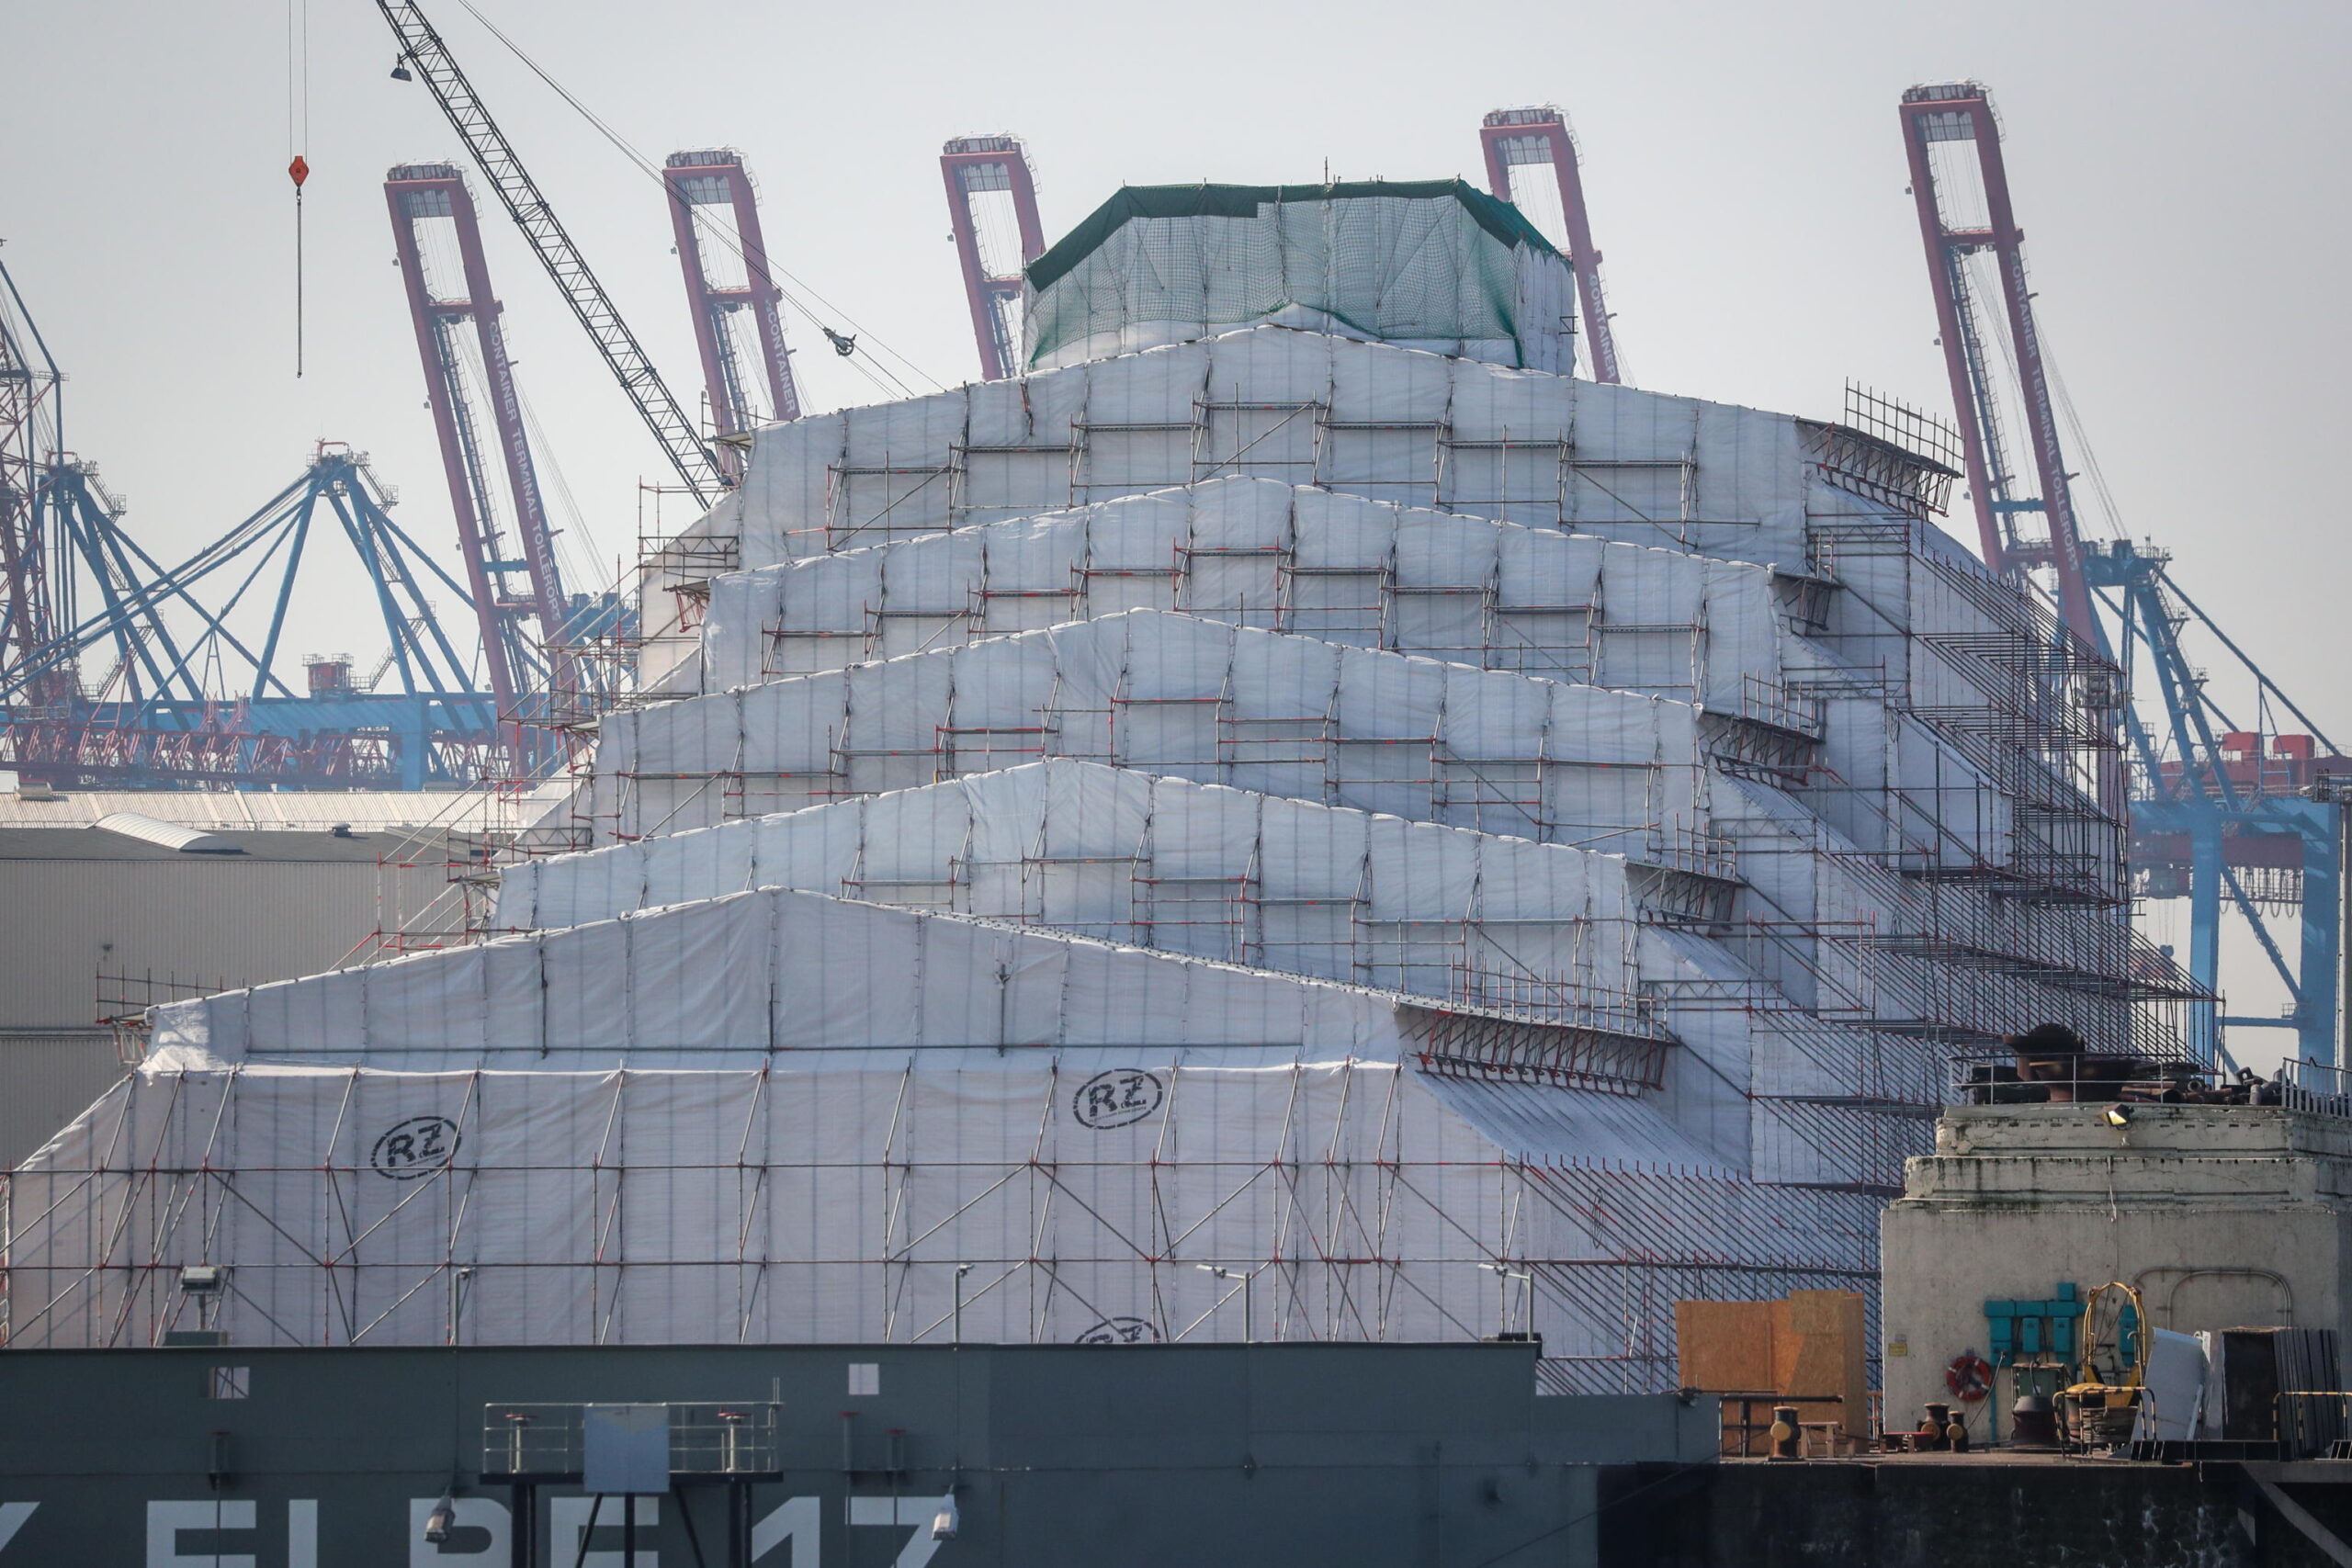 epa09844448 The mega yacht Dilbar, probably owned by Alisher Usmanow, sits covered with tarps inside a dry dock at Blohm + Voss shipyards in Hamburg, northern Germany, 23 March 2022. Blohm + Voss belongs to the Bremen based Luerssen Group and specializes in the construction and maintenance of luxury yachts and military ships.  EPA/FOCKE STRANGMANN